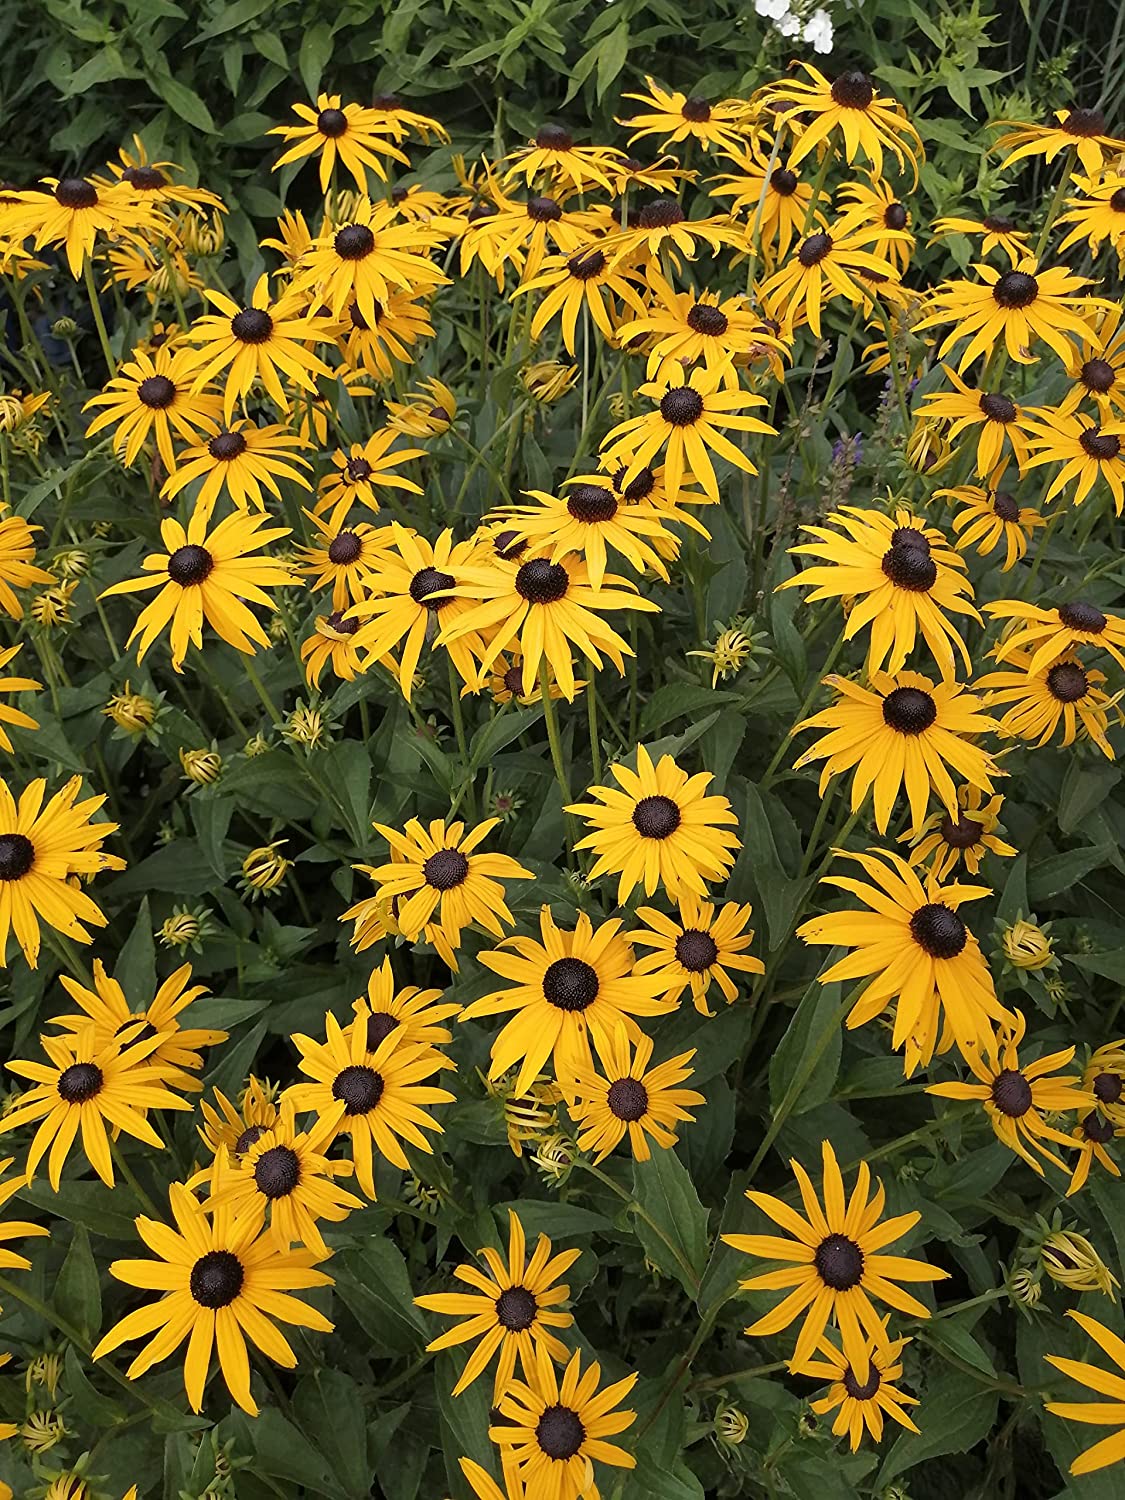 Hundredfold Black-Eyed Susan Wild Flower 500 Seeds - Rudbeckia hirta Canada Native Wildflower, Black Eyed Susan, Excellent for Bee and Butterfly Garden